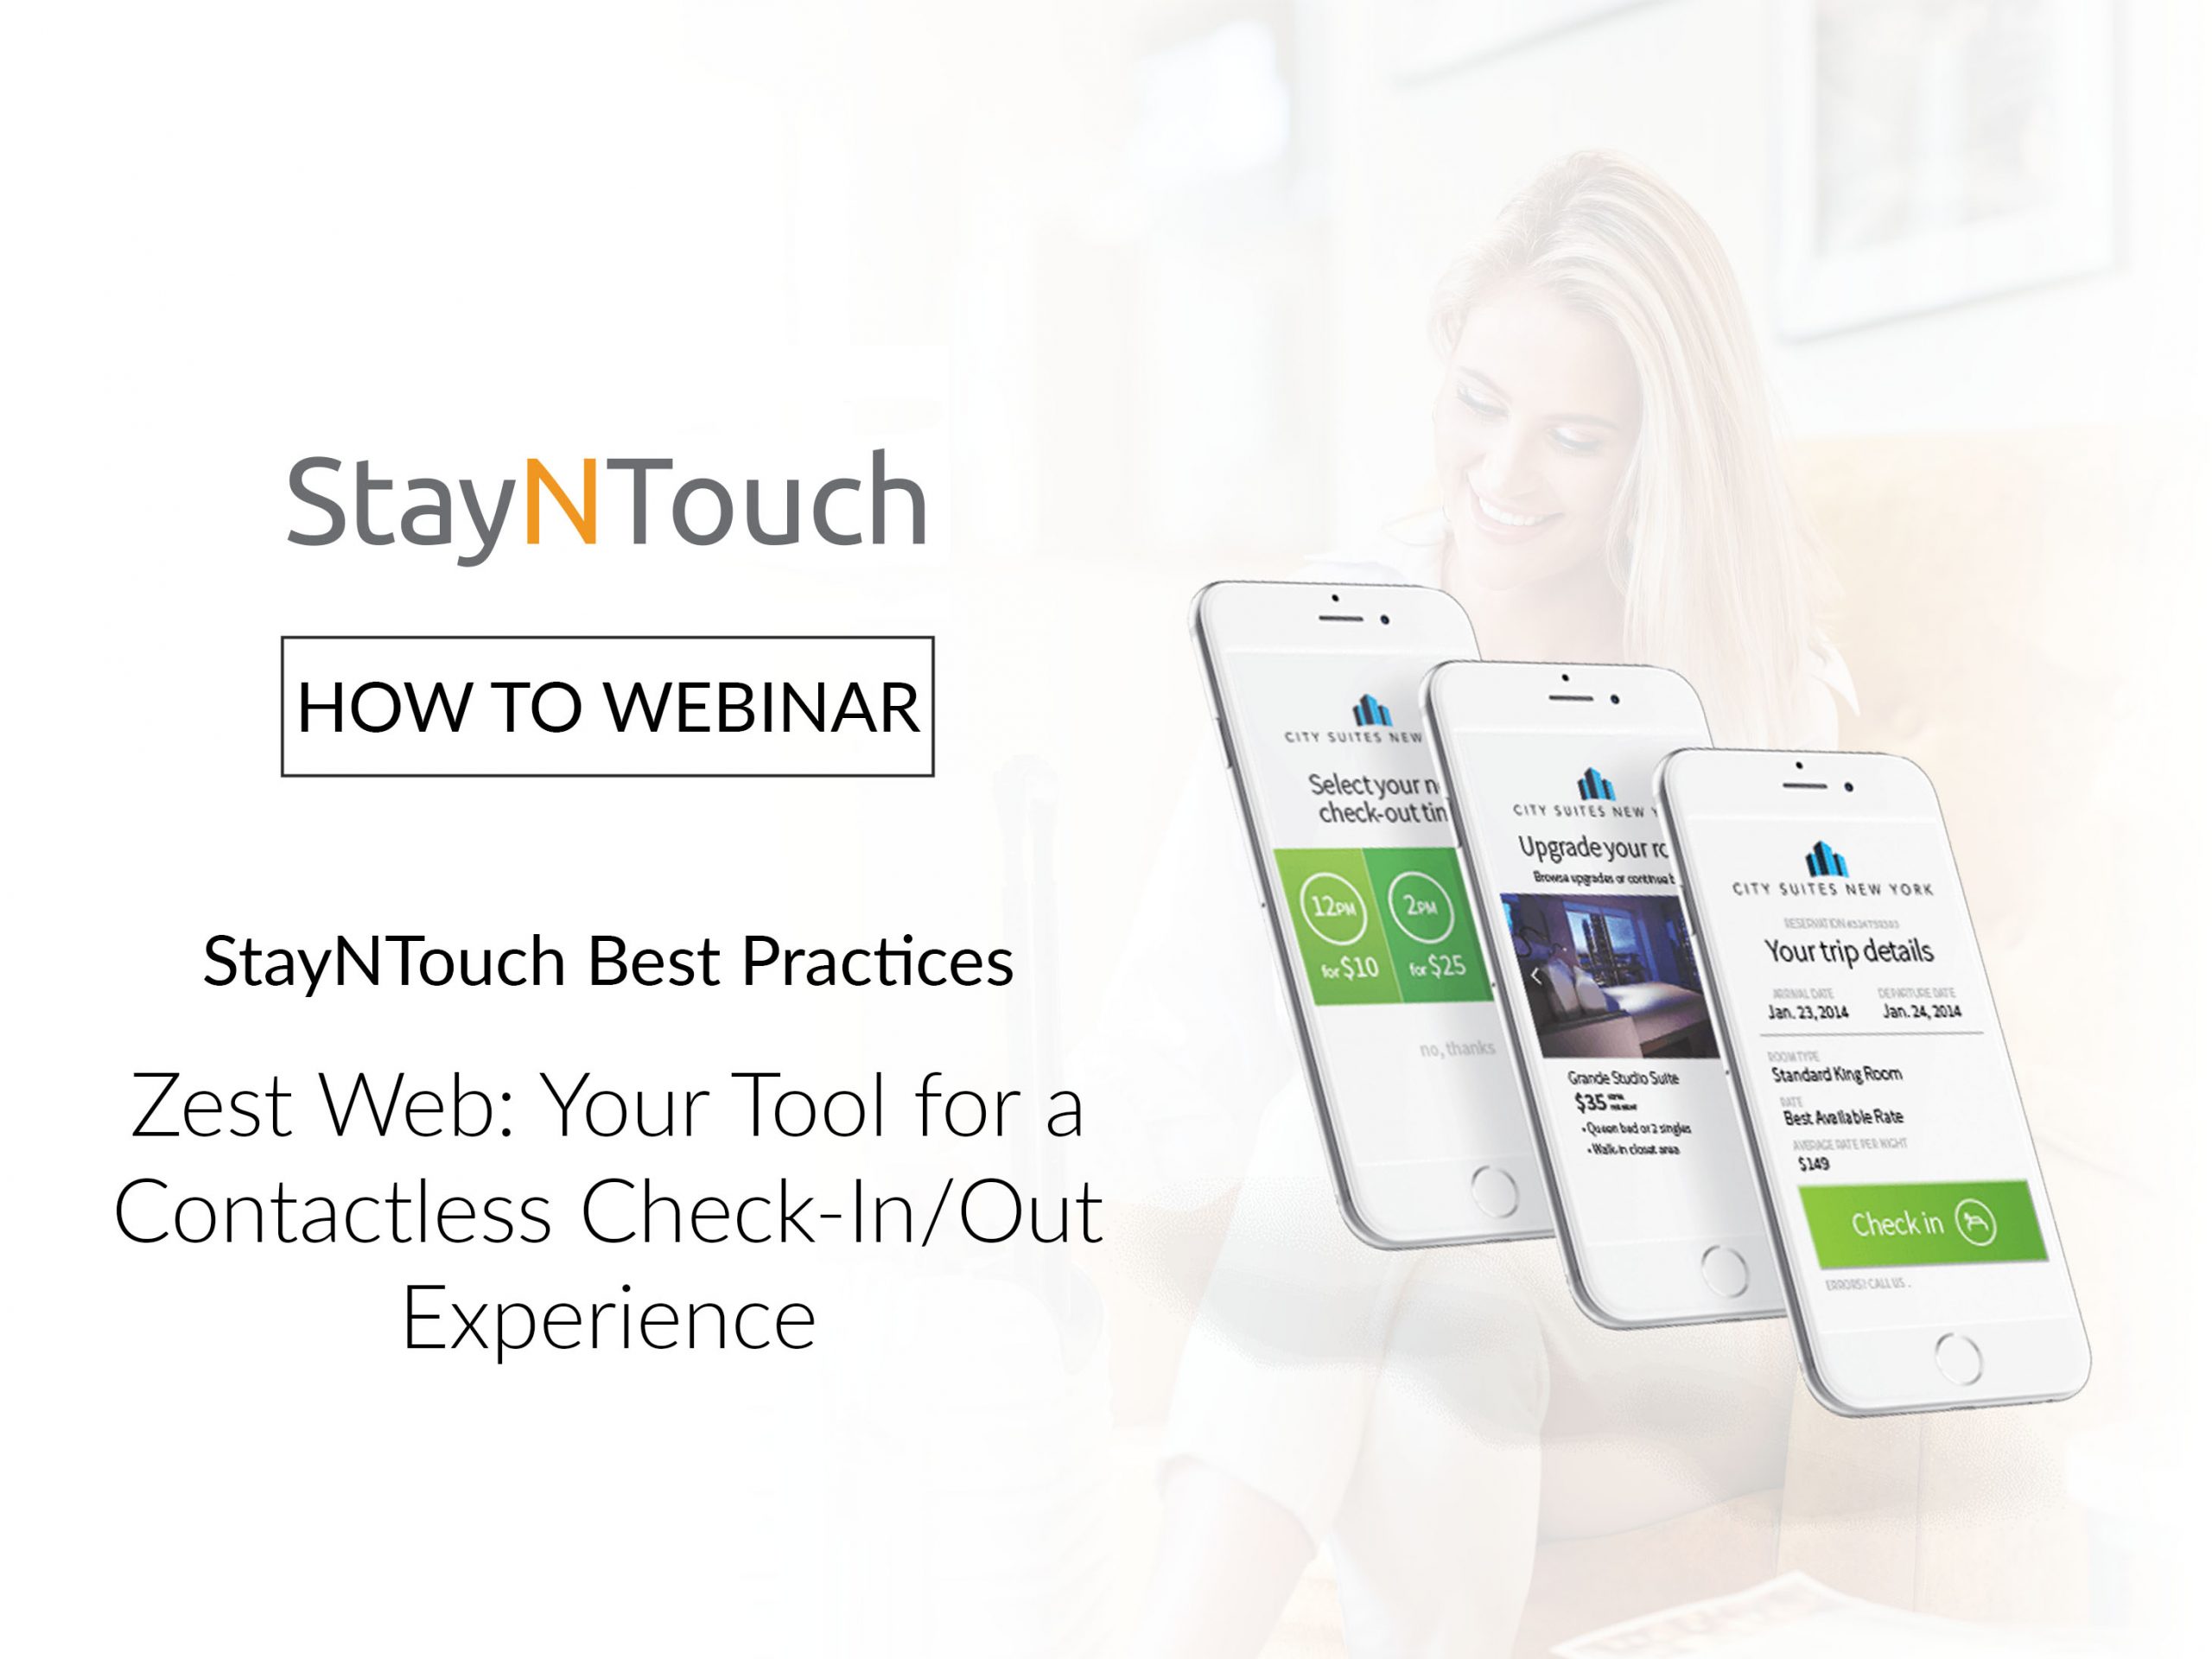 StayNTouch Best Practices Zest Web: Your Tool for a Contactless Check-In/Out Experience